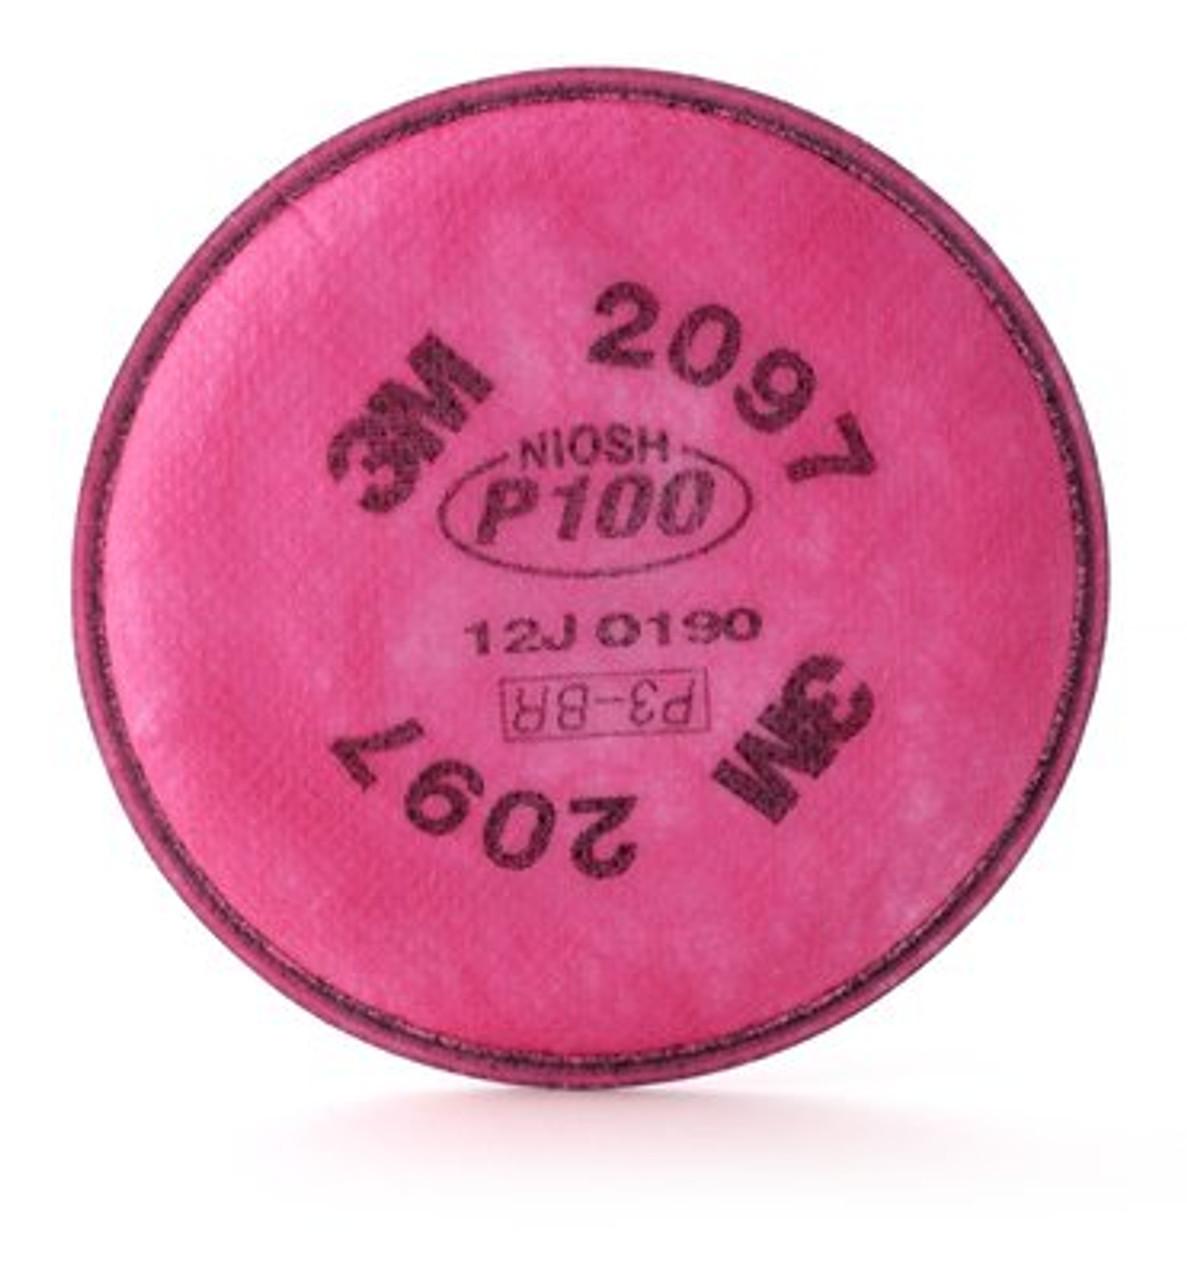 3M™ Particulate Filter 2097/07184(AAD), P100, with Nuisance Level Organic Vapor Relief